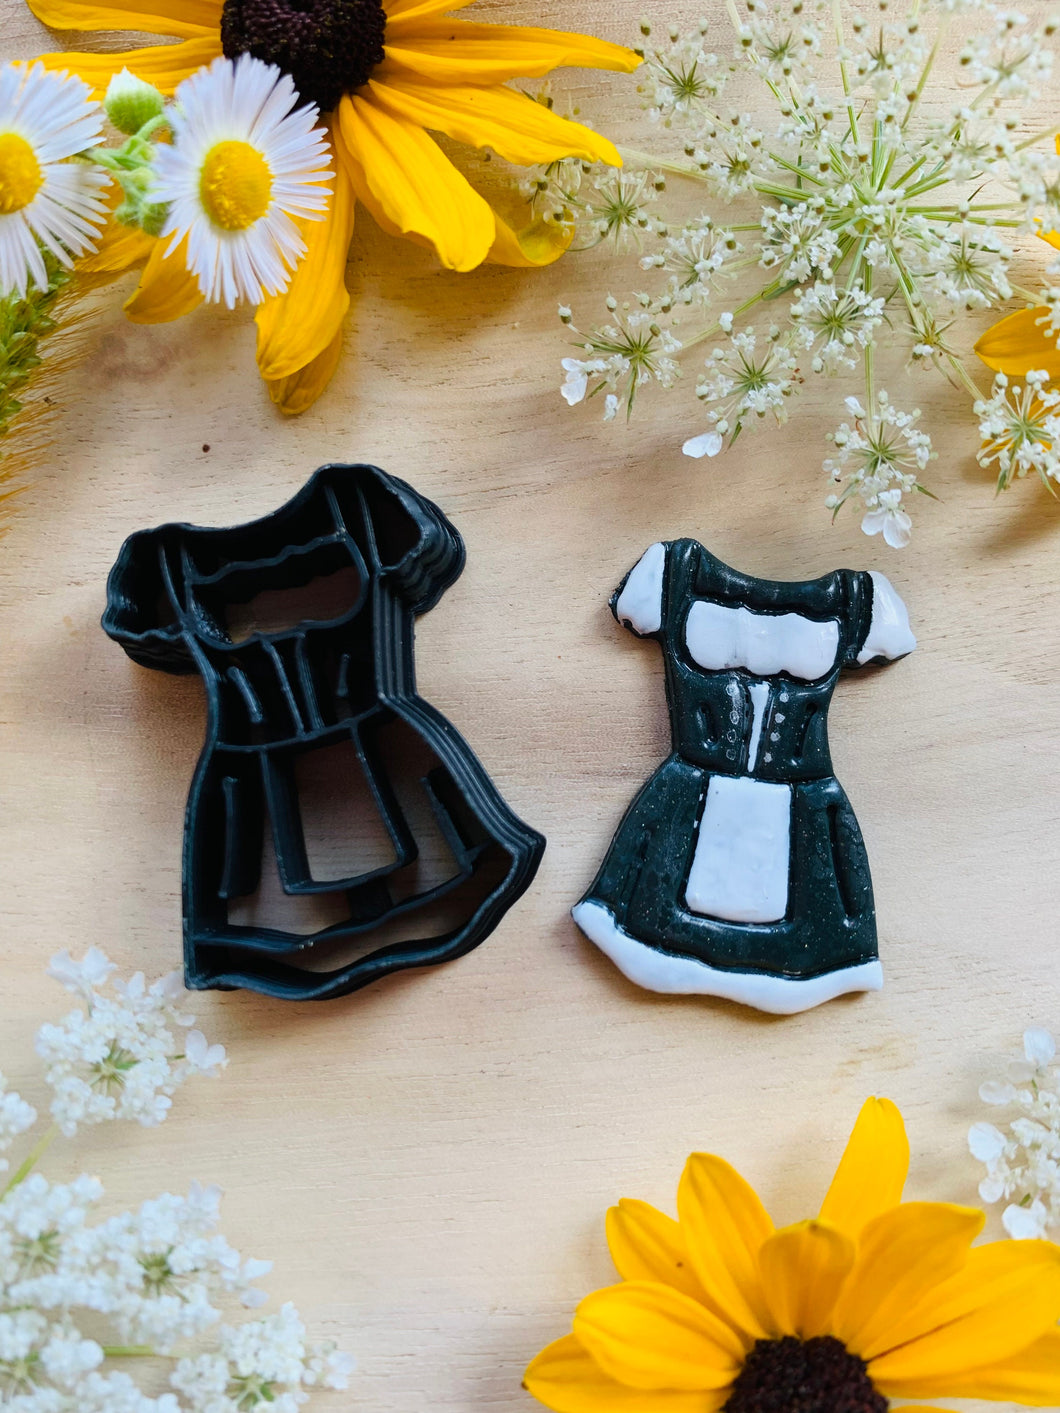 Oktoberfest Dress with Corset and Apron in Band - Embossed Sharp Clay Cutter